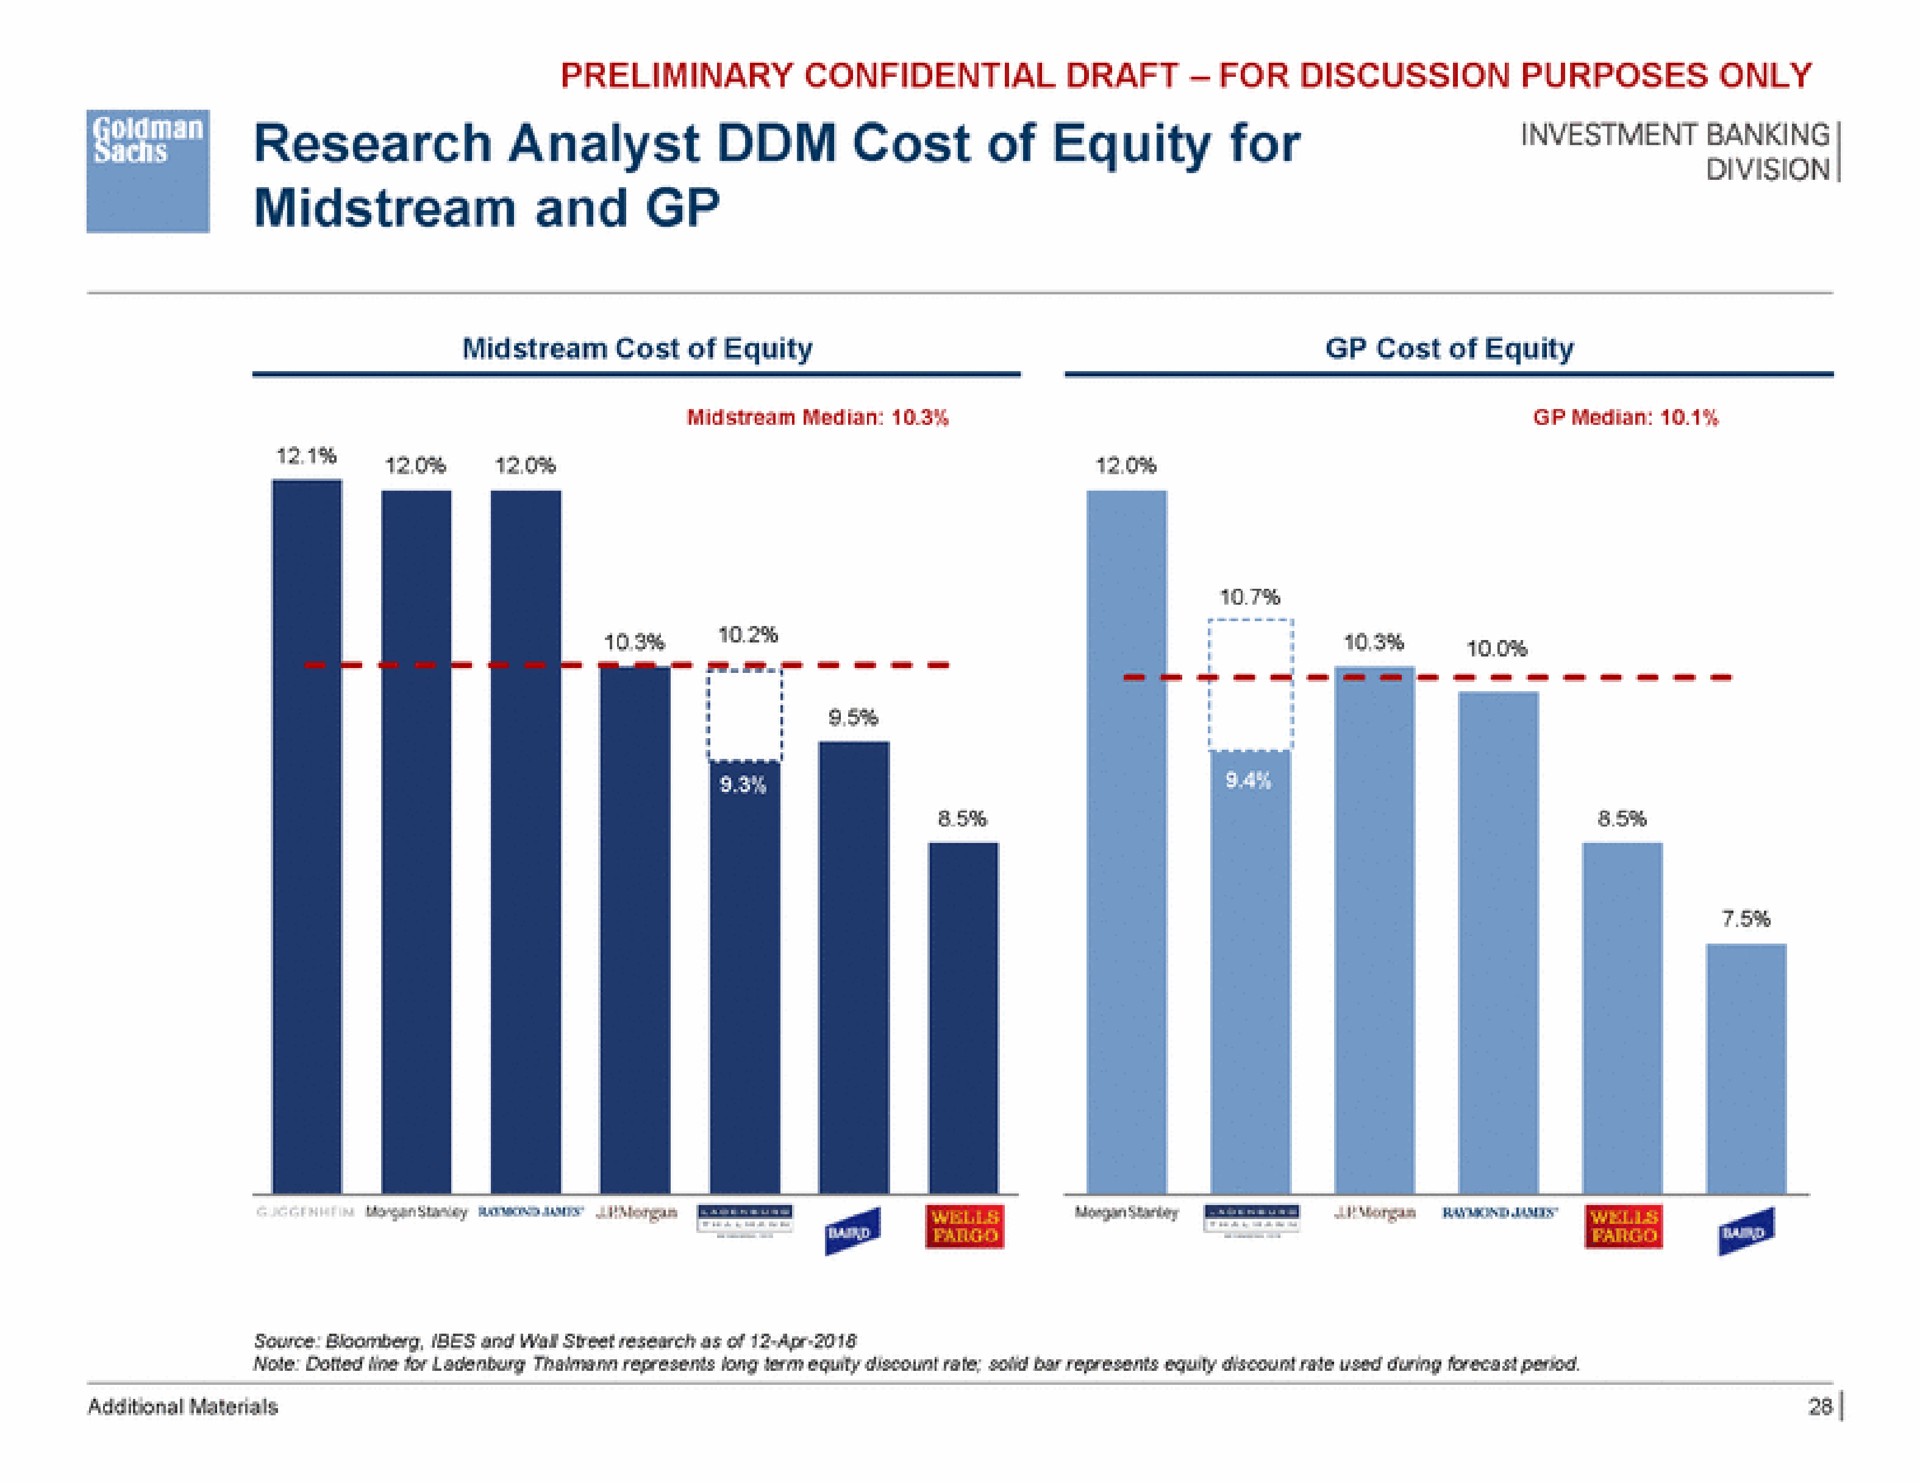 research analyst cost of equity for midstream and | Goldman Sachs